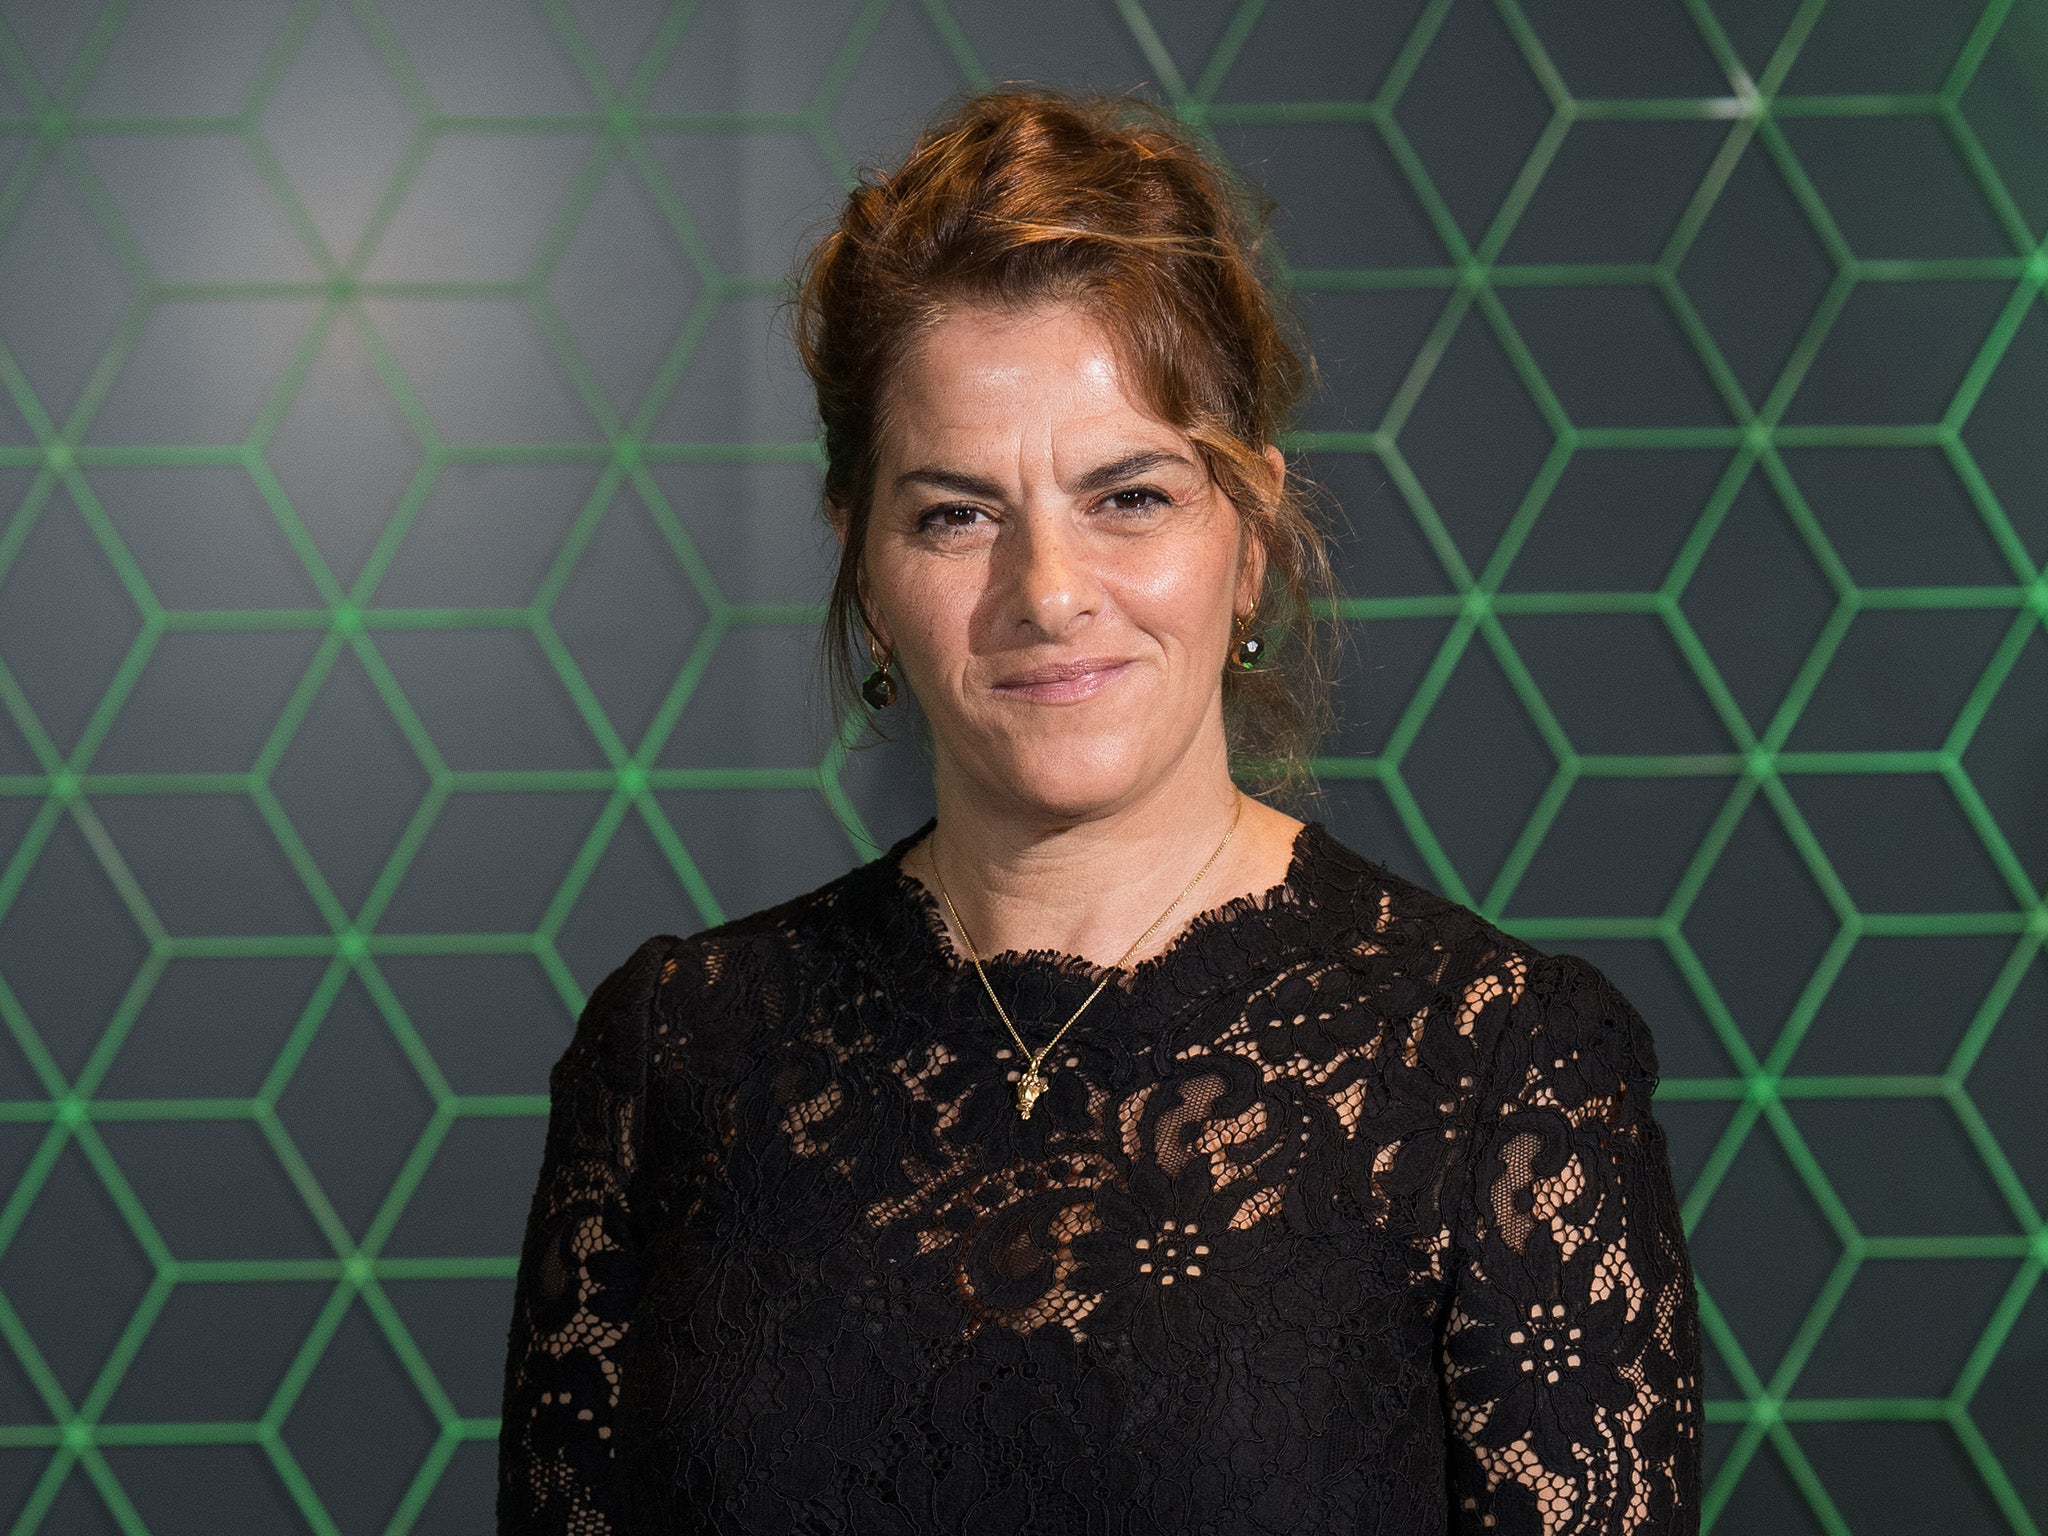 Tracey Emin at an event in 2018